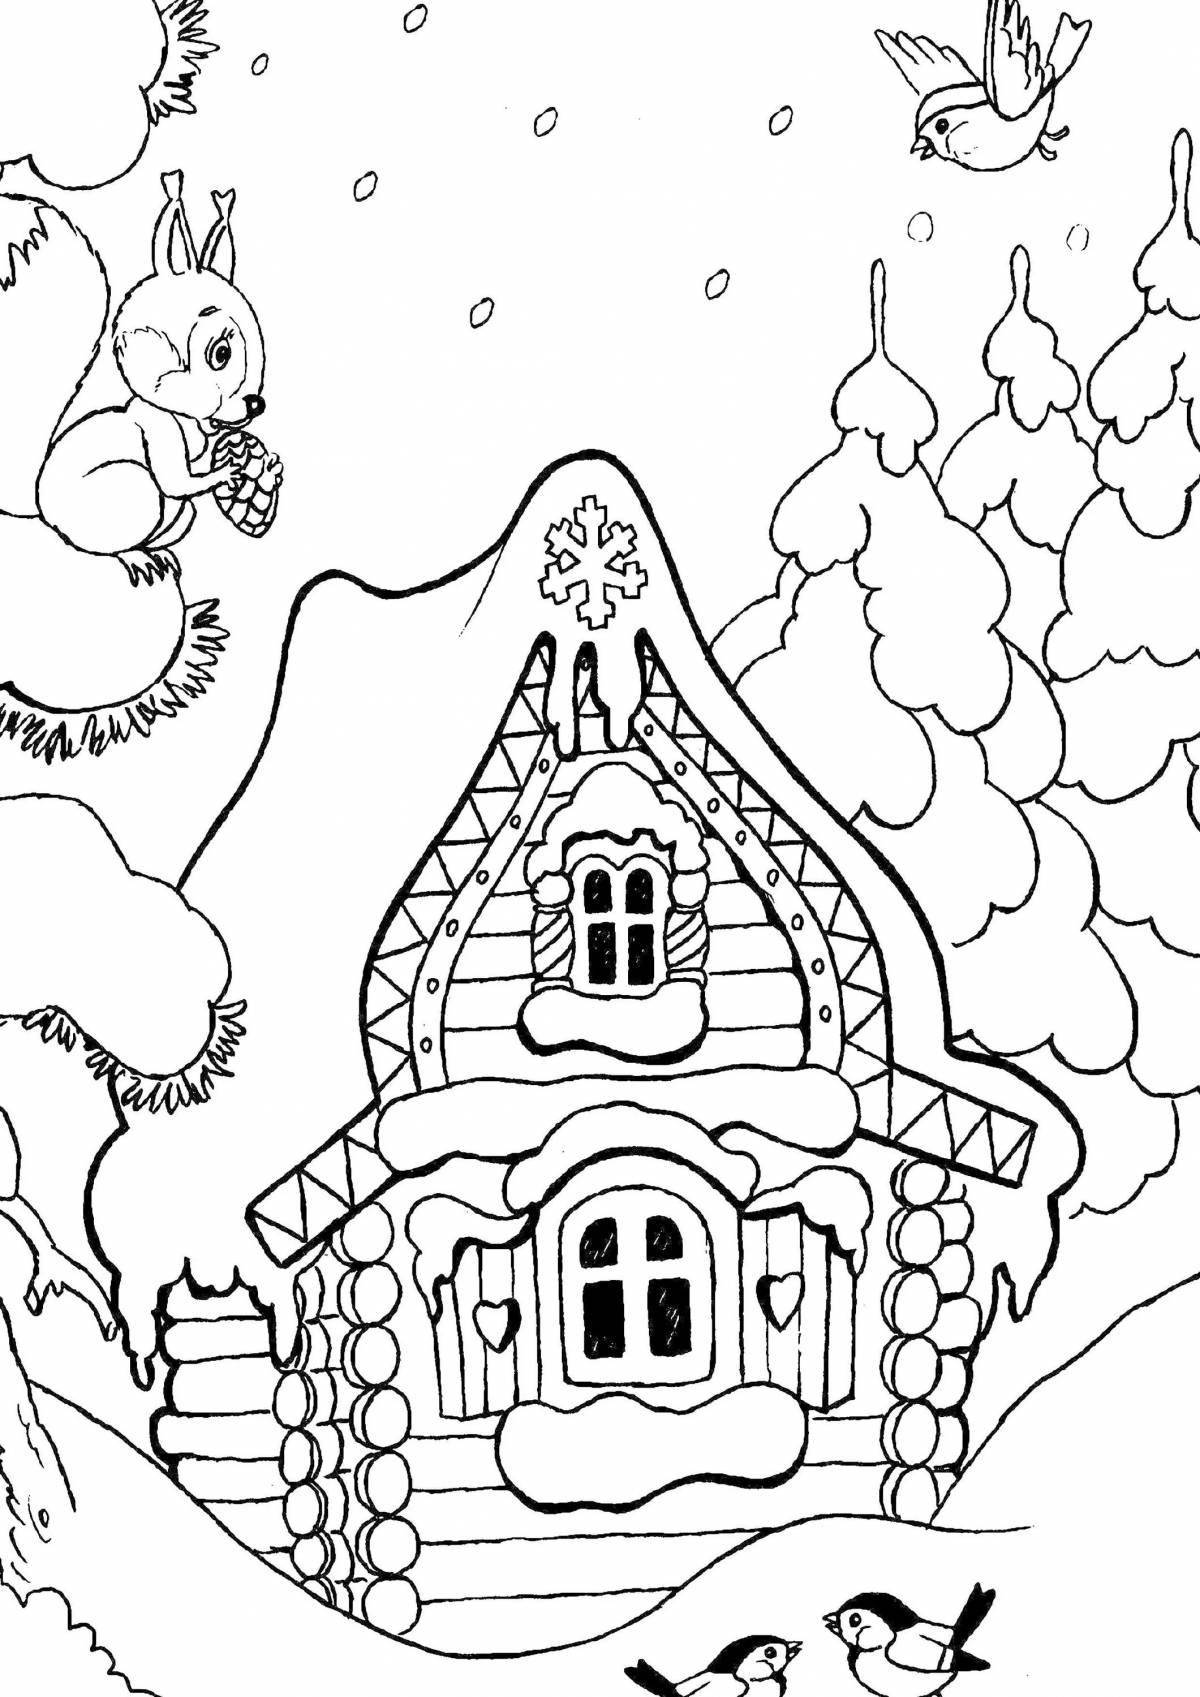 Colorful winter house coloring page